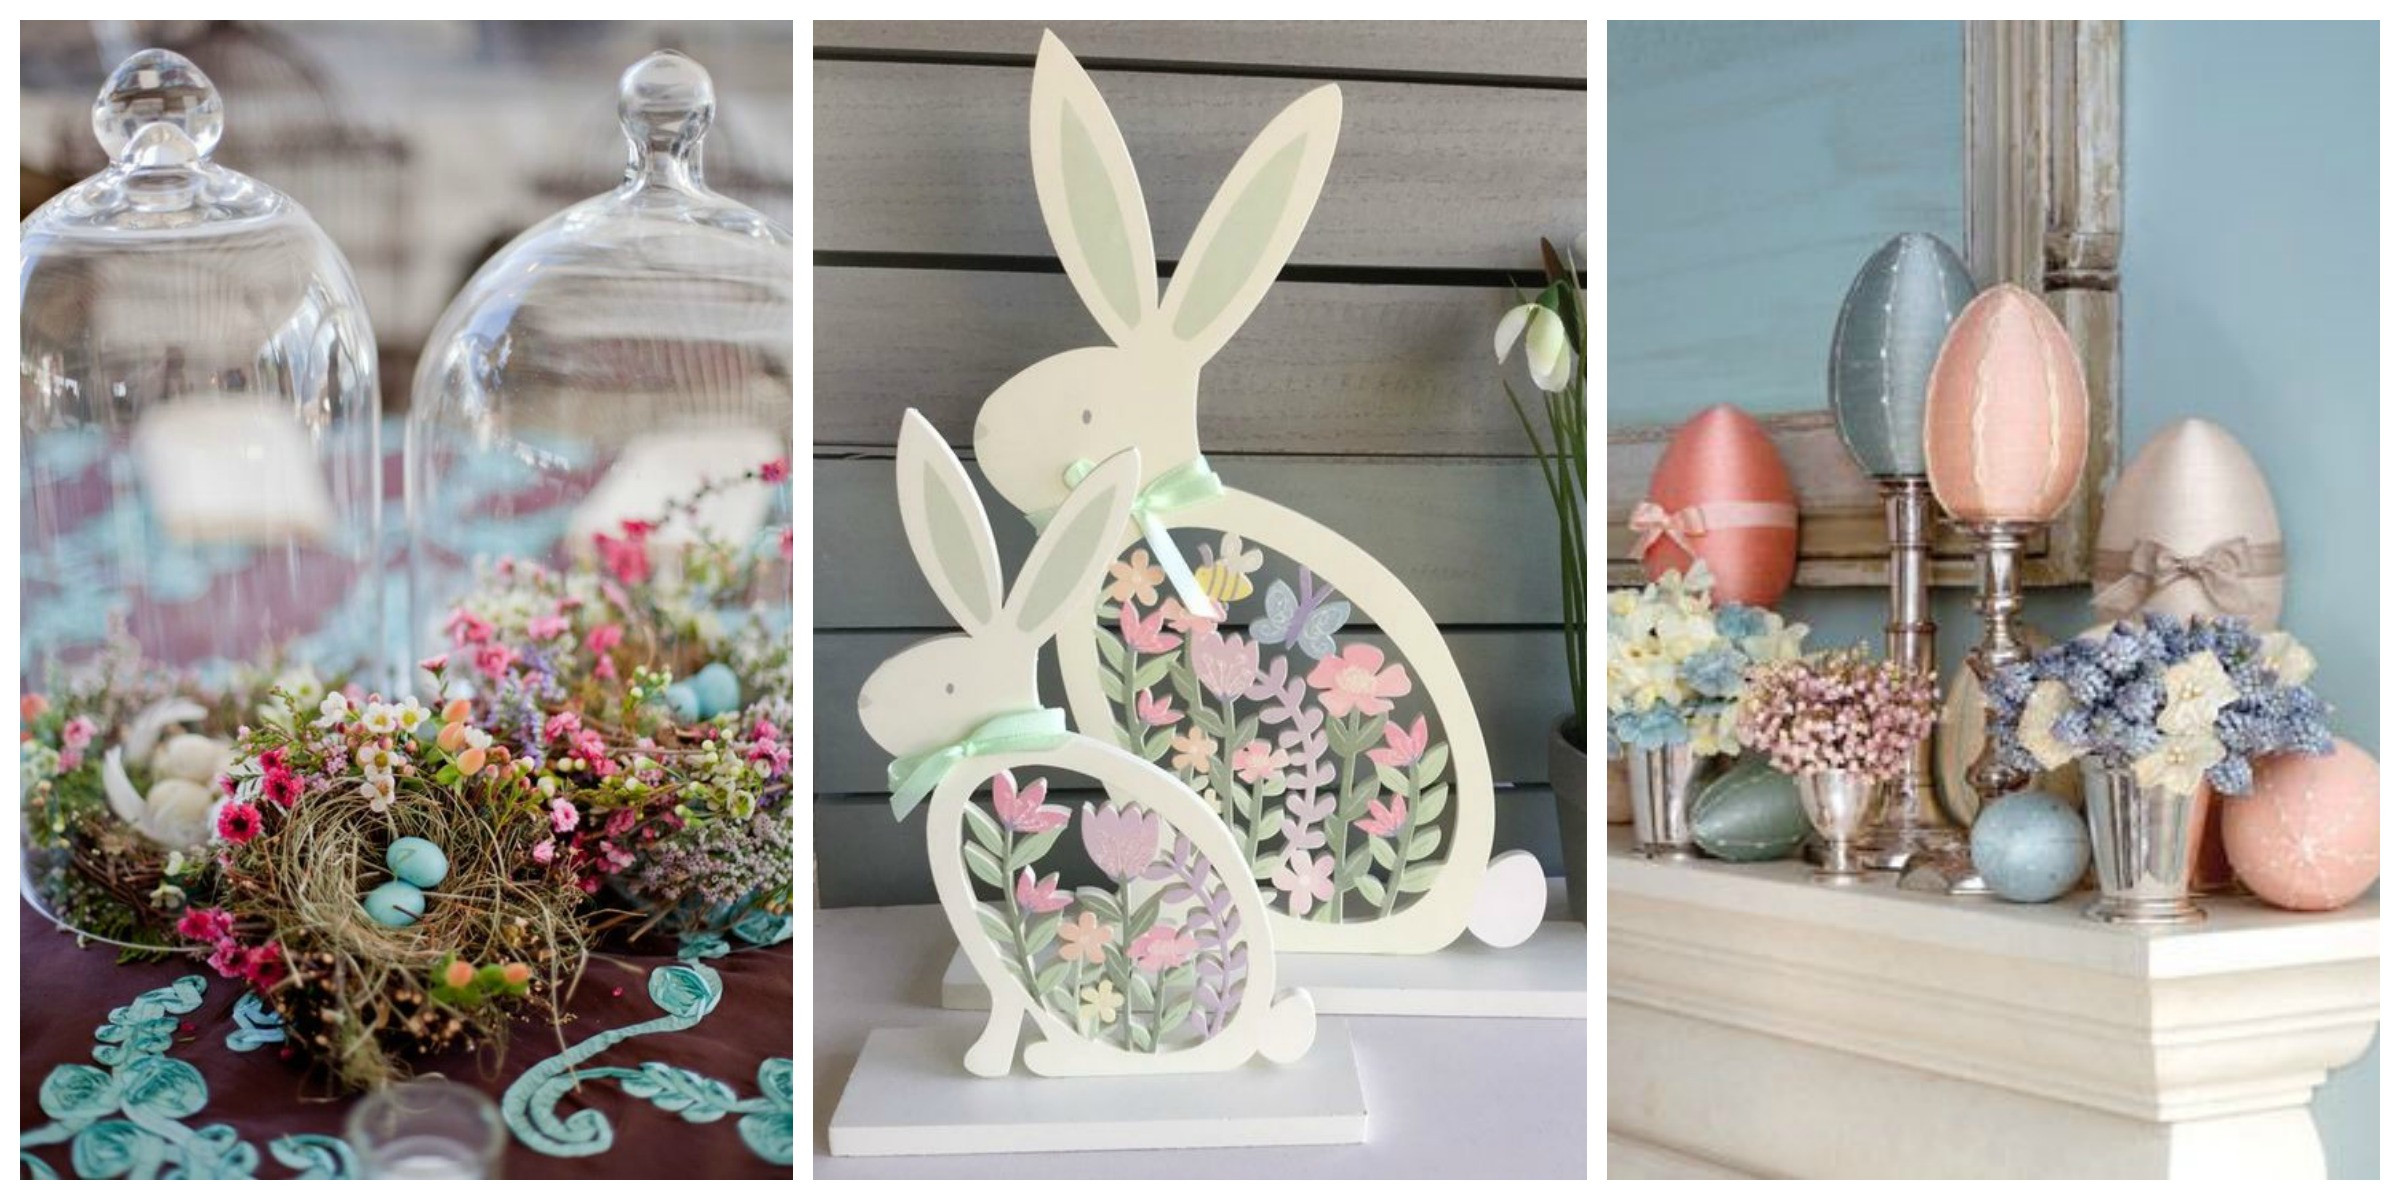 Easter Home Decorating Ideas
 Decorating your Home for Easter Champagne and Petals